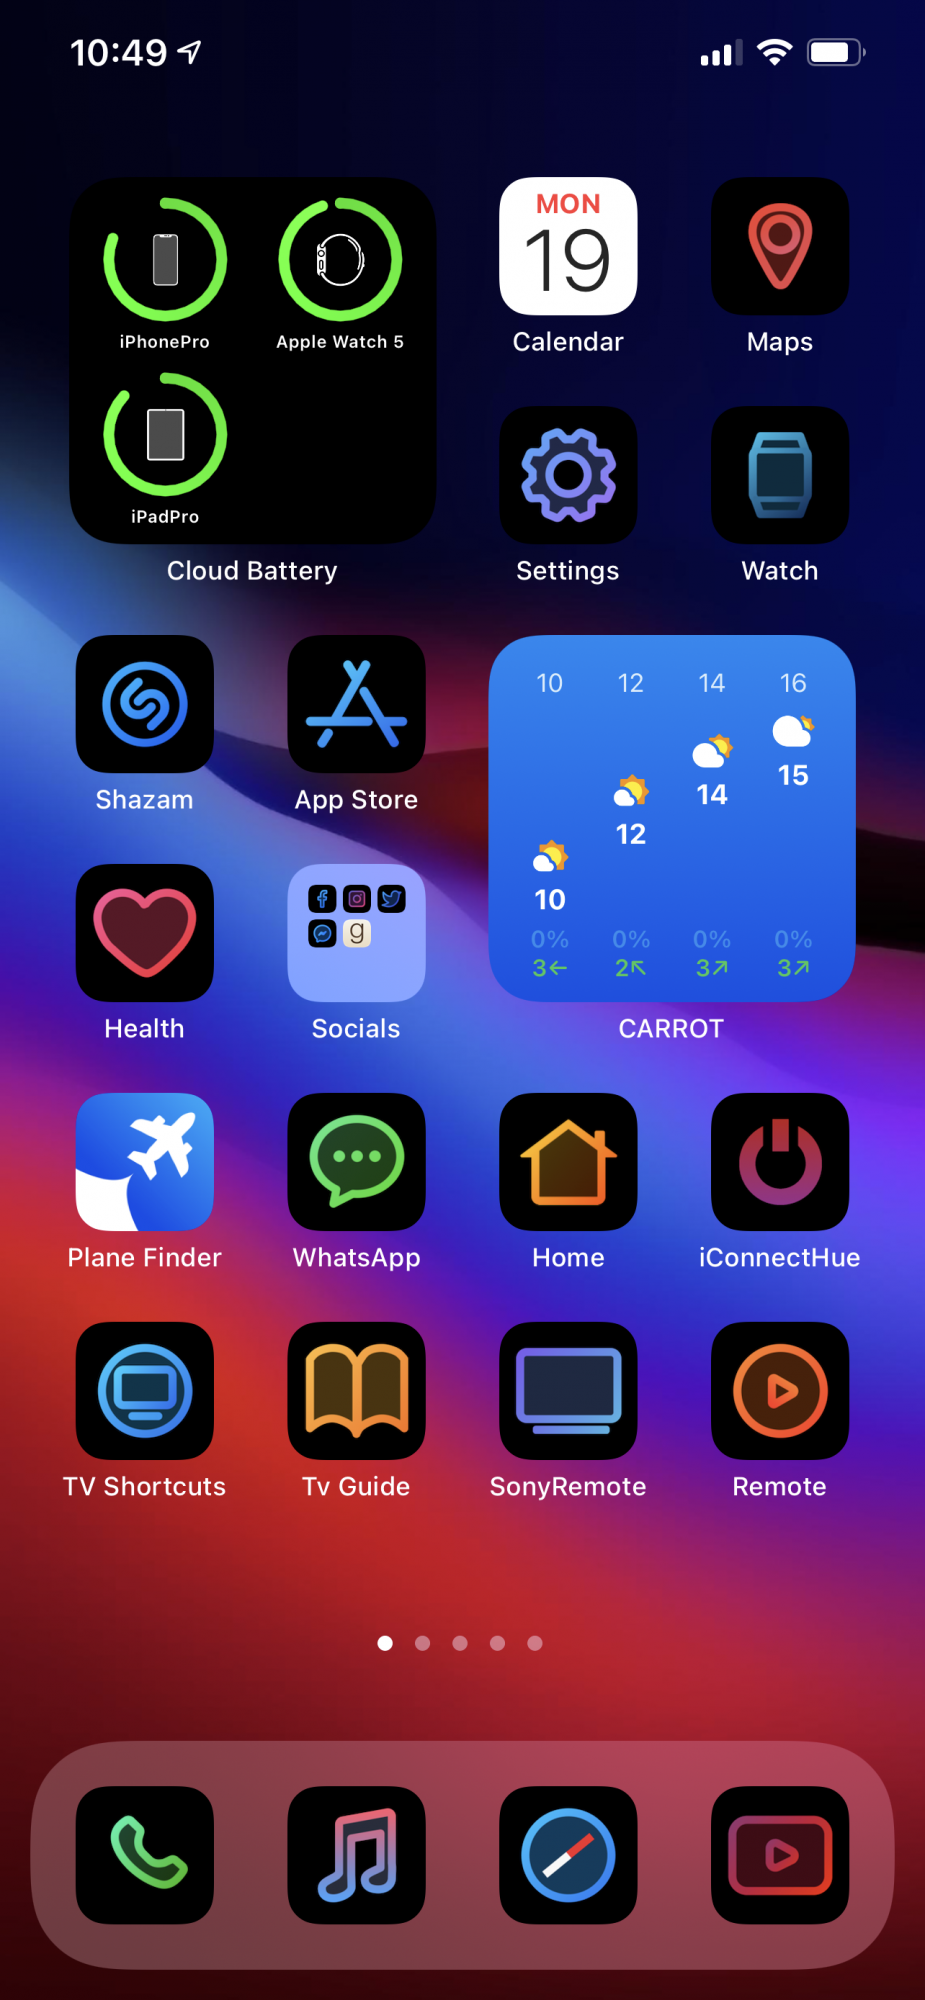 Post your iOS 14 home screen layout | Page 65 | MacRumors Forums